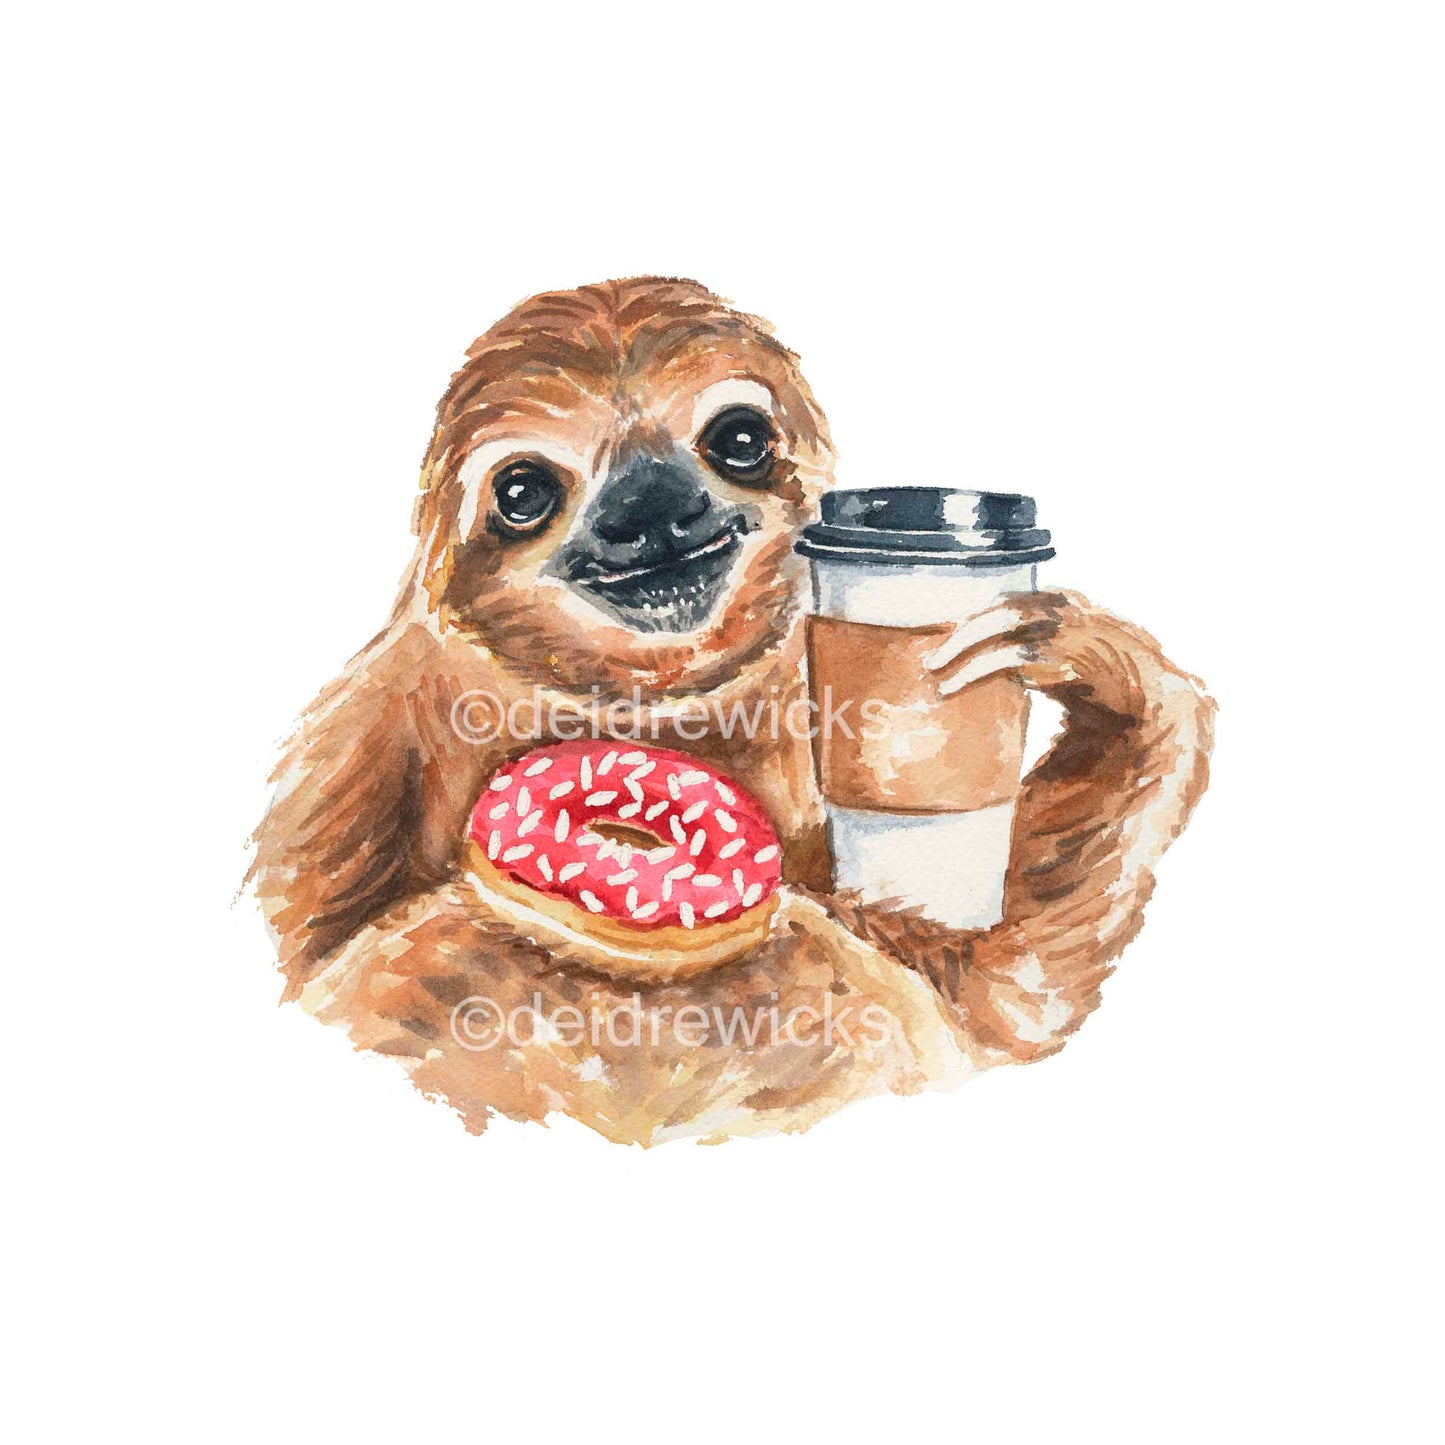 Watercolour painting of a sloth holding coffee and a sprinkle donut